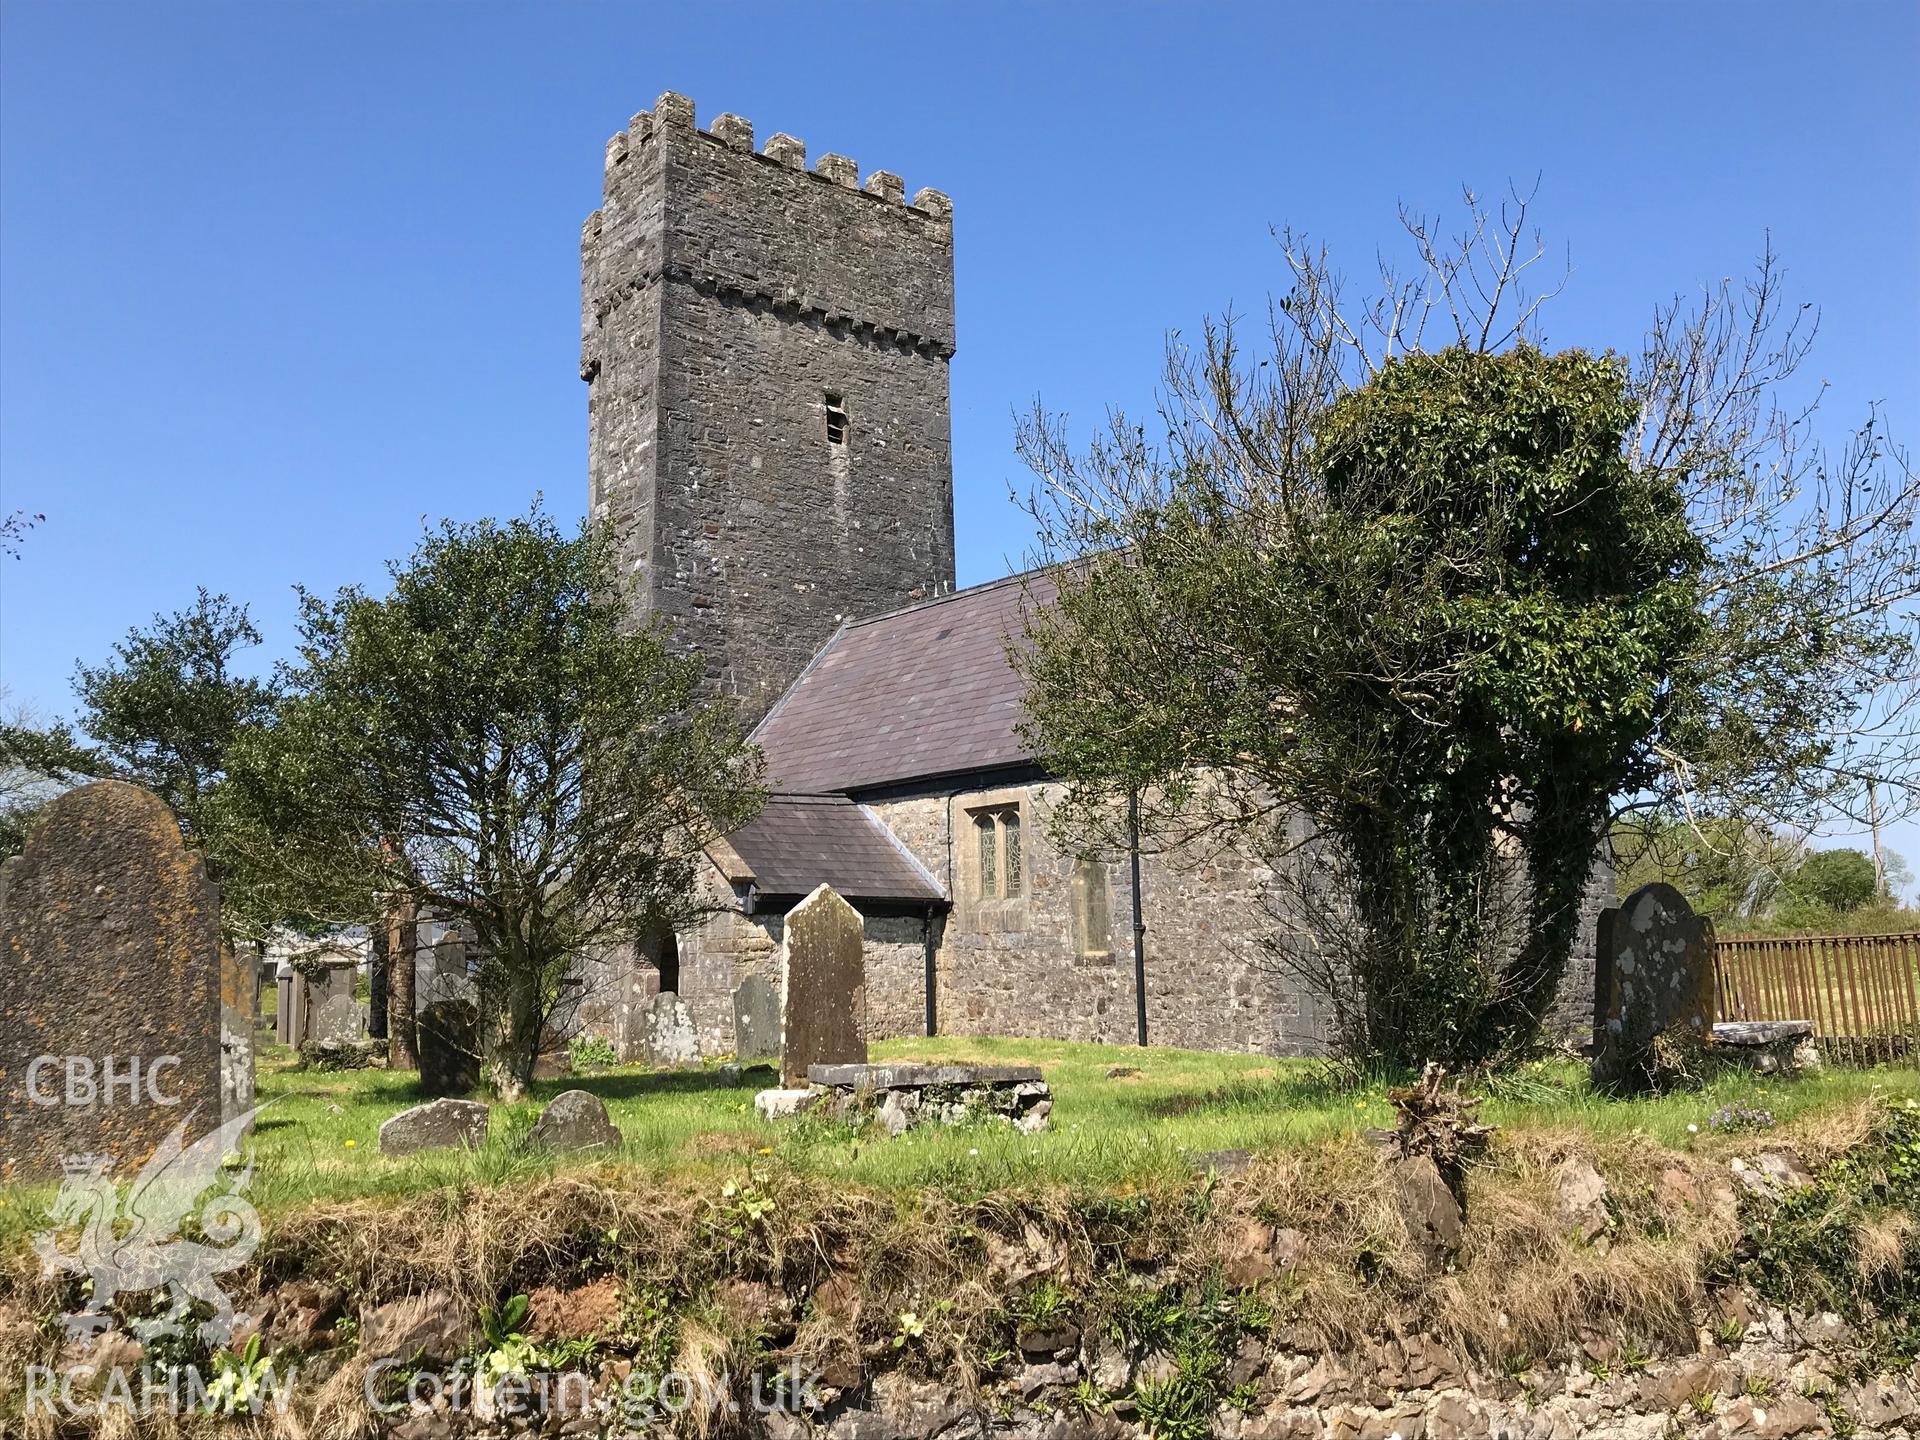 Colour photo showing exterior view of St. Lawrence's church and graveyard, Marros, taken by Paul R. Davis, 6th May 2018.